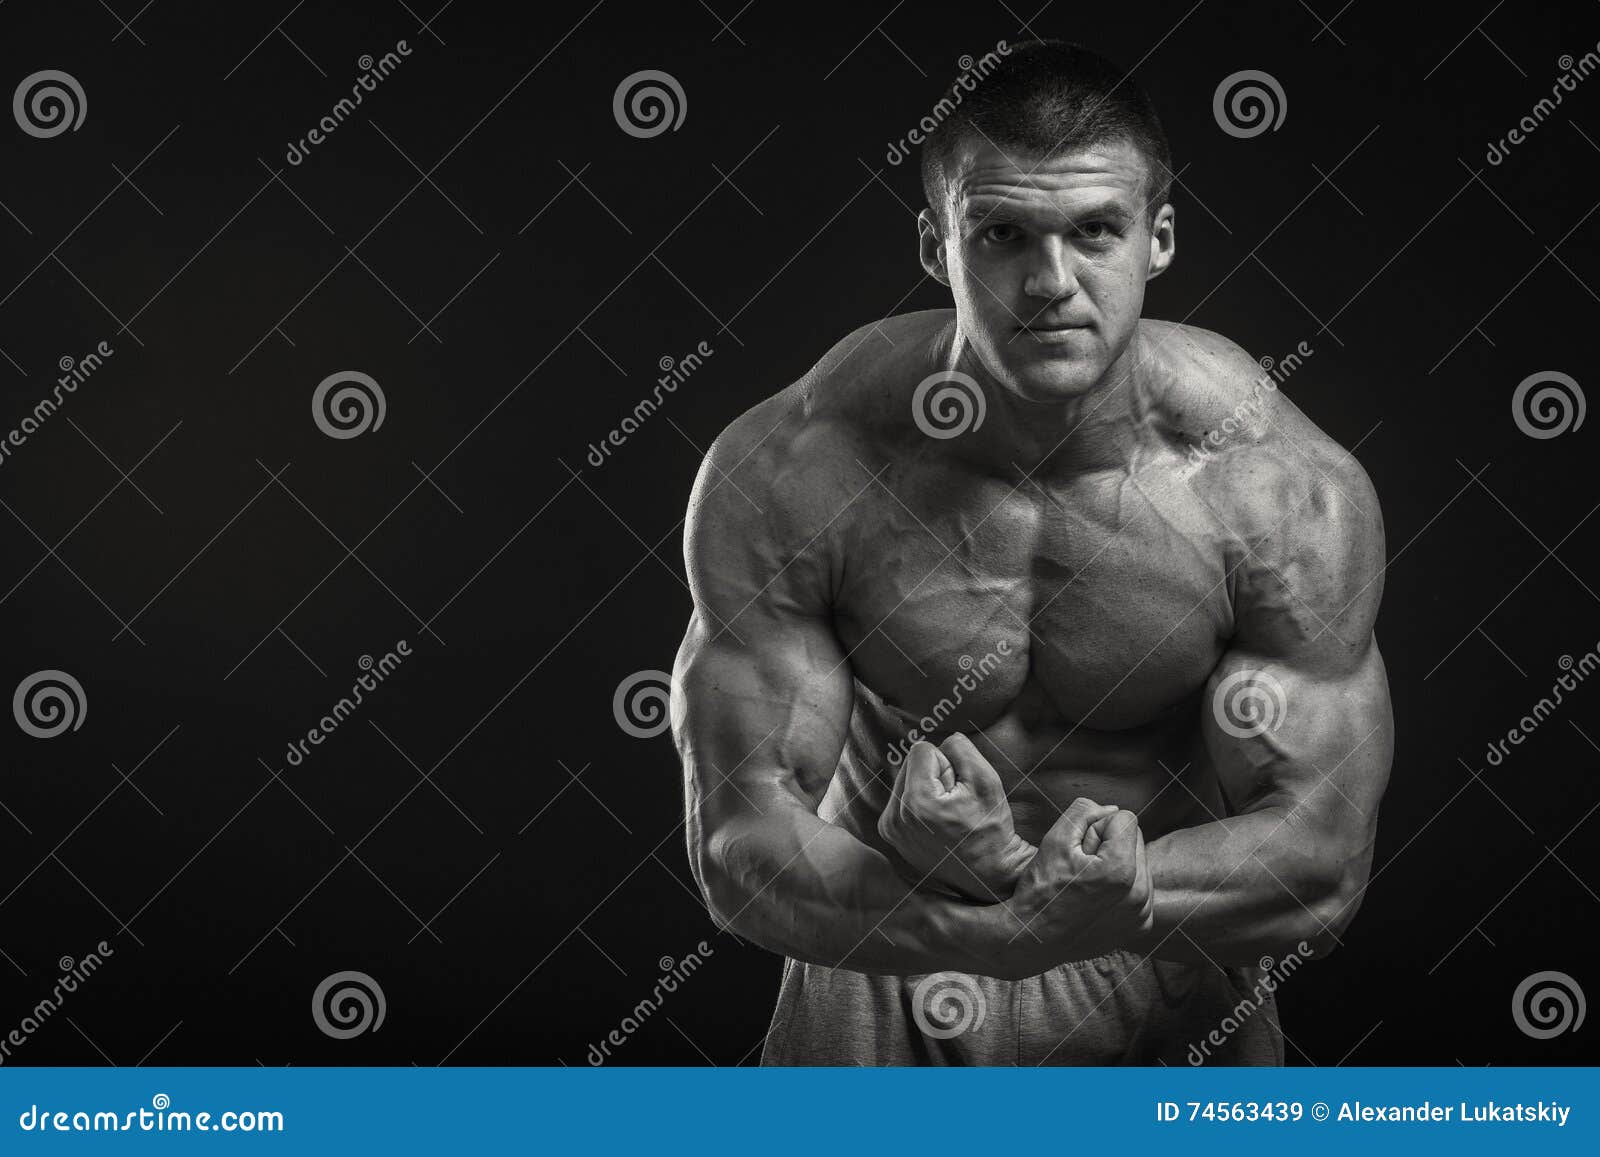 Muscular Man on a Dark Background Stock Image - Image of abdominal ...